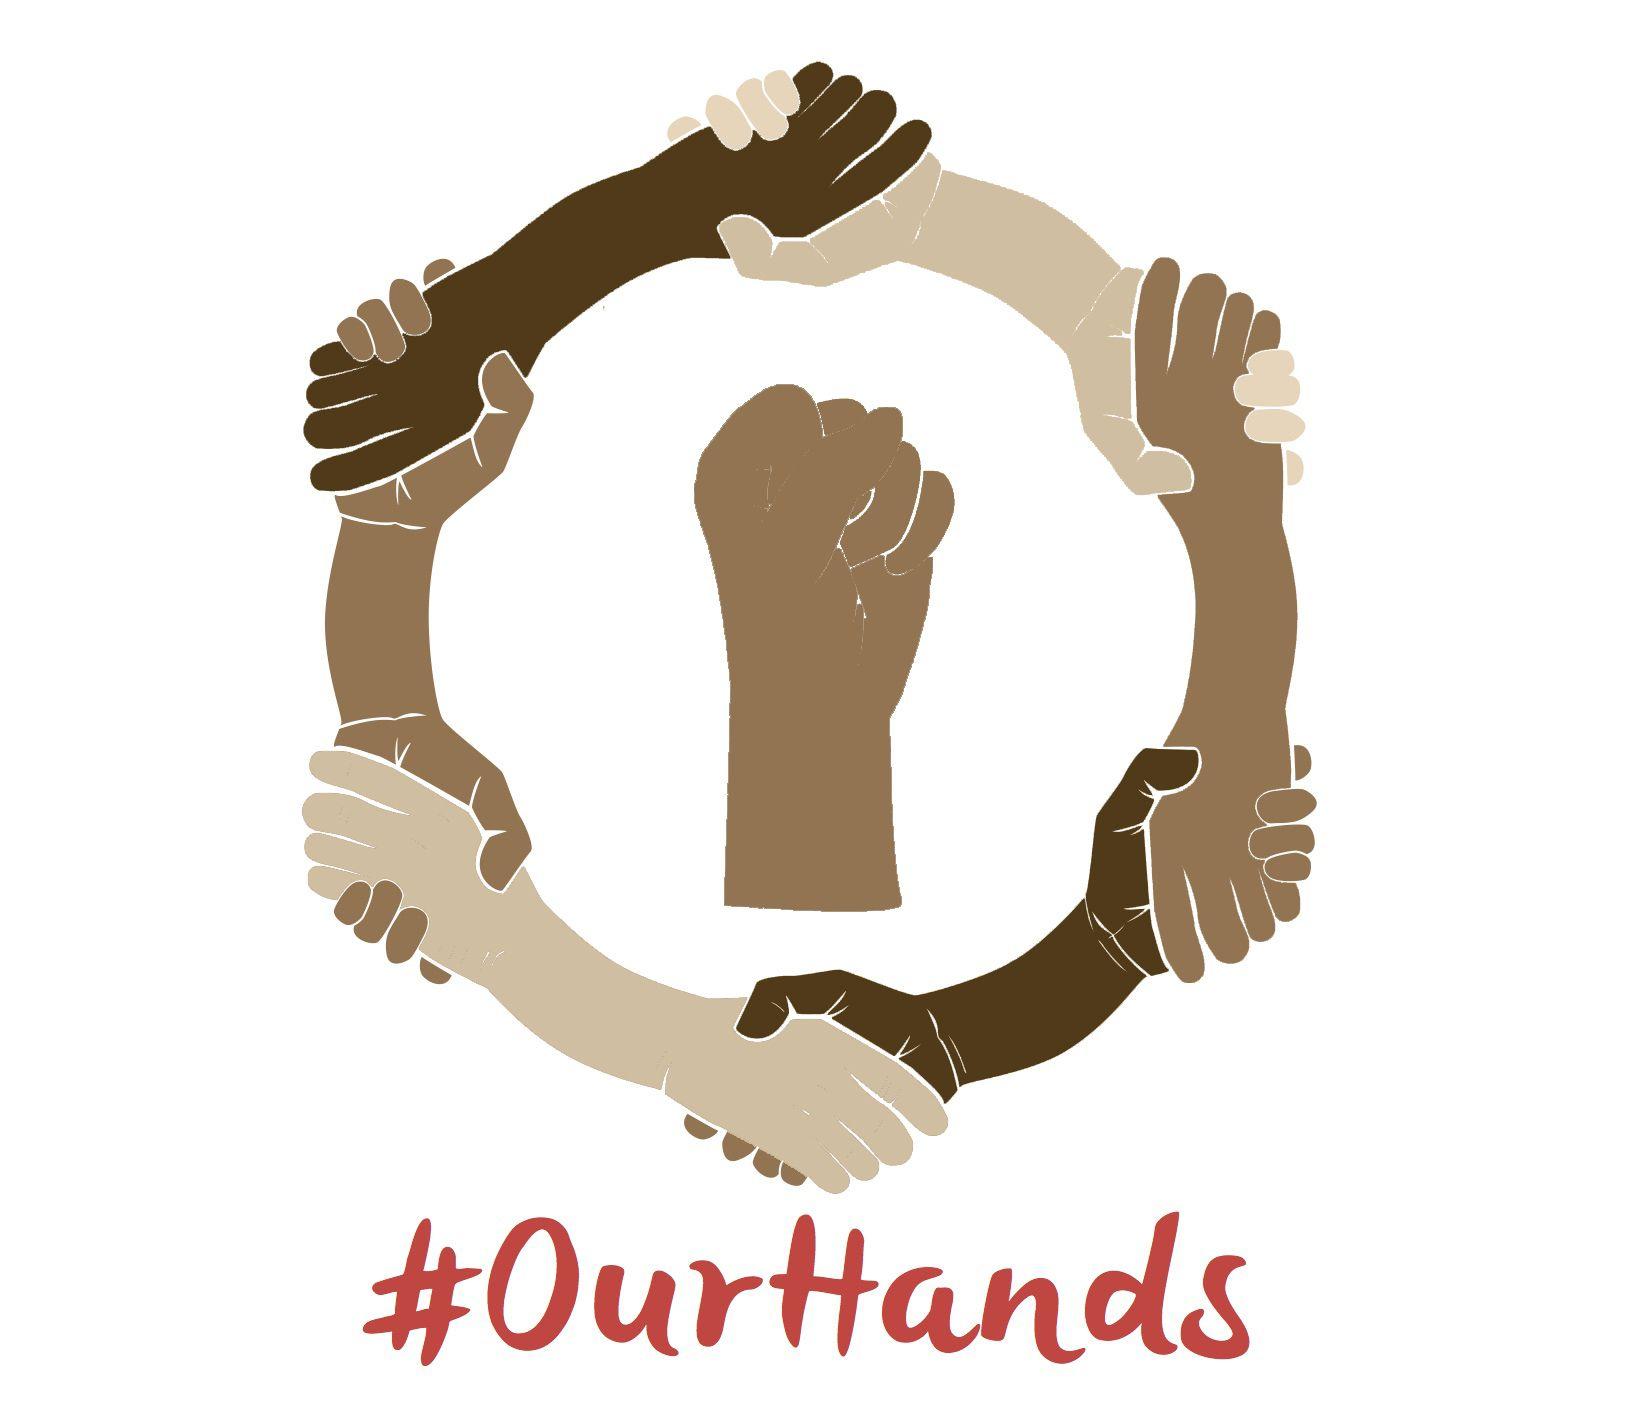 Worker Logo - Joining #OurHands for Domestic Worker Rights | DWRights.org